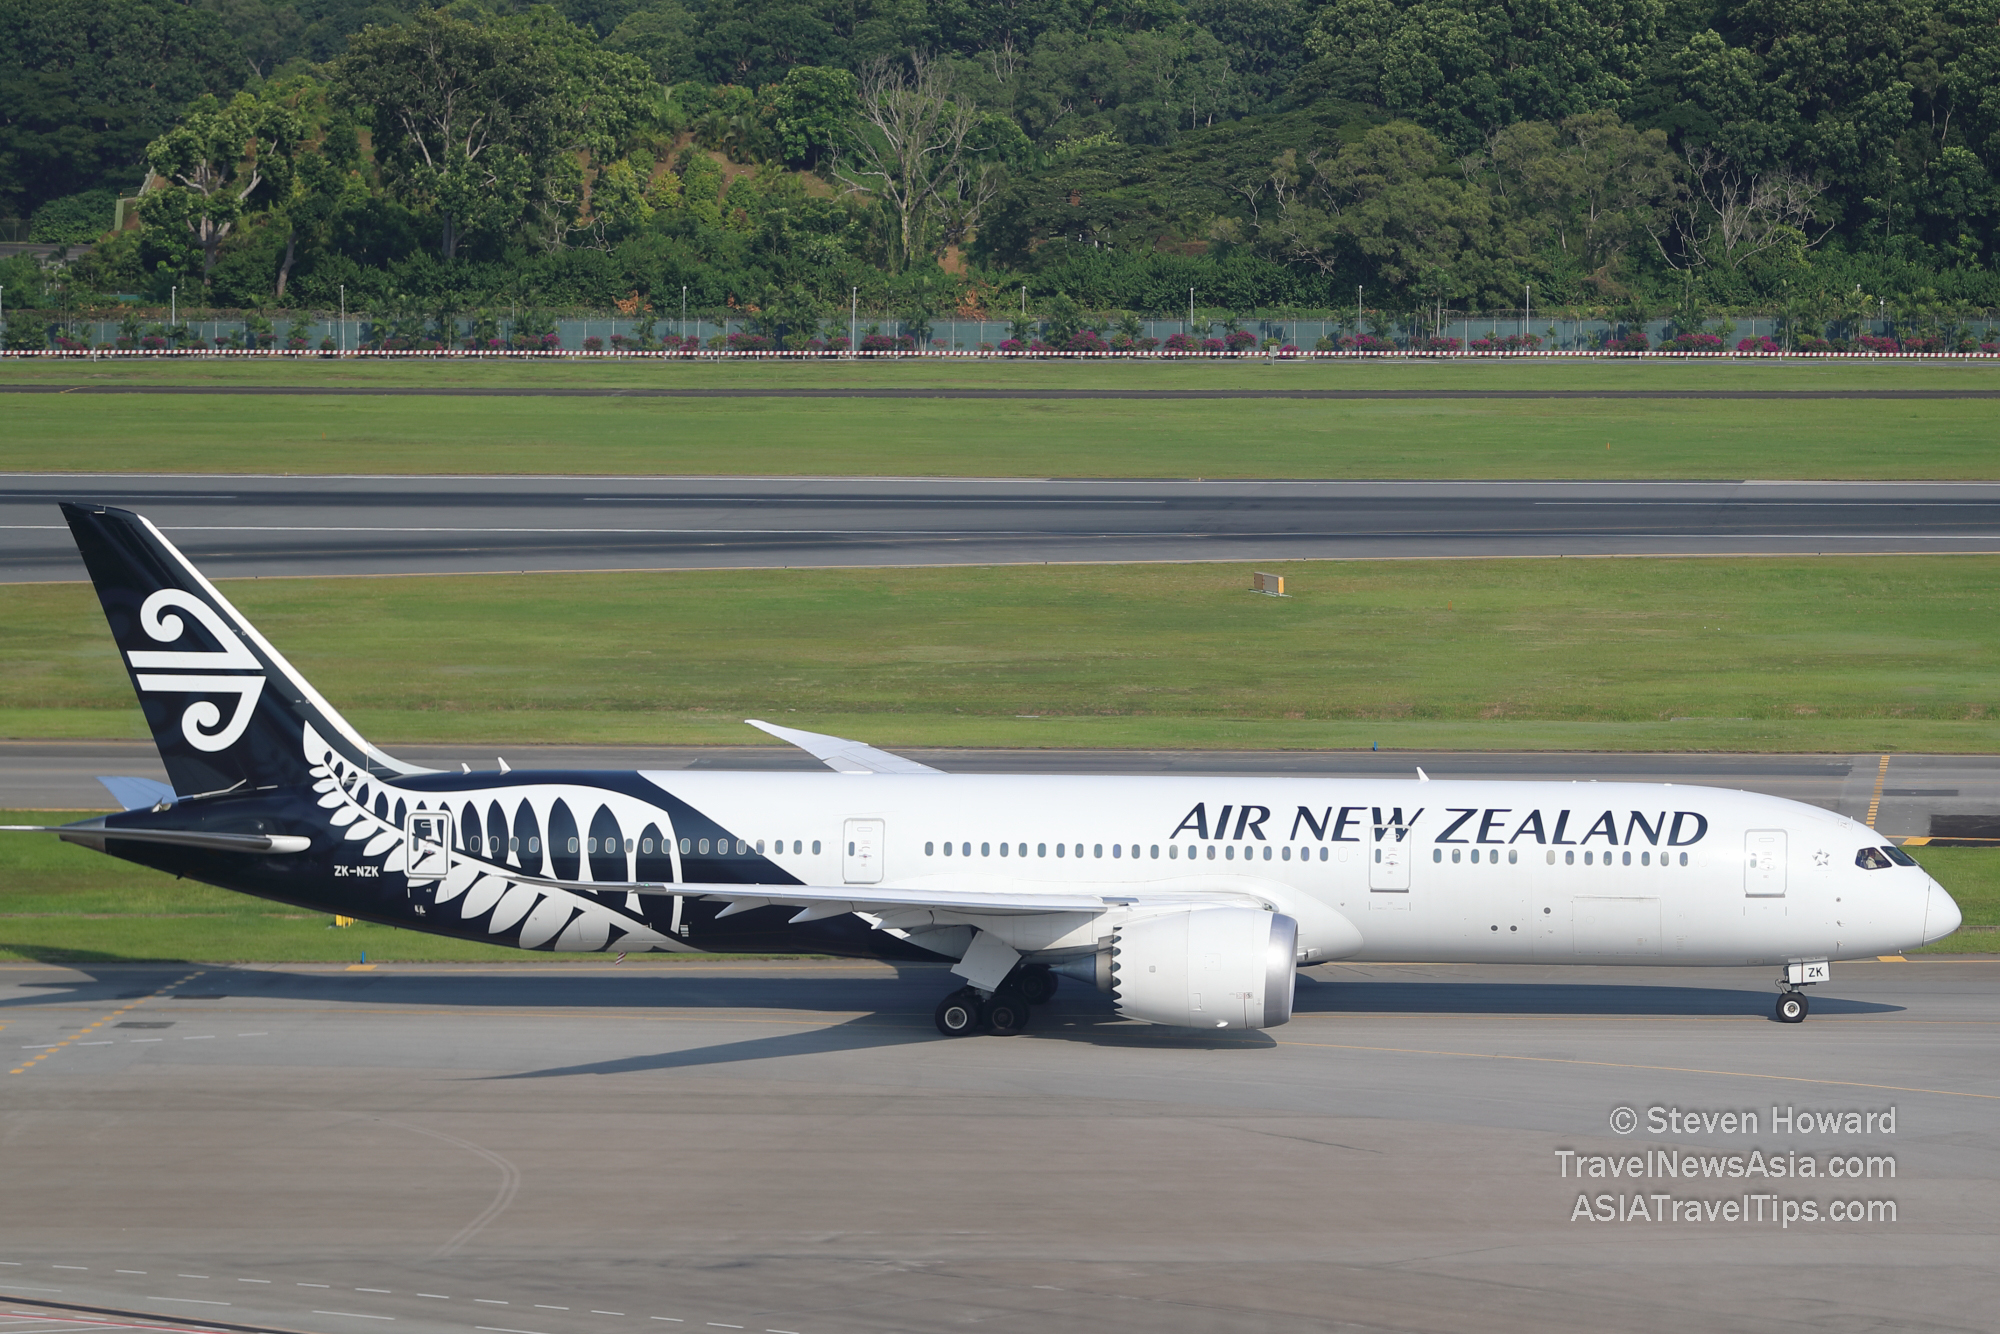 Air New Zealand Boeing 787-9 Dreamliner reg: ZK-NZK. Picture by Steven Howard of TravelNewsAsia.com Click to enlarge.